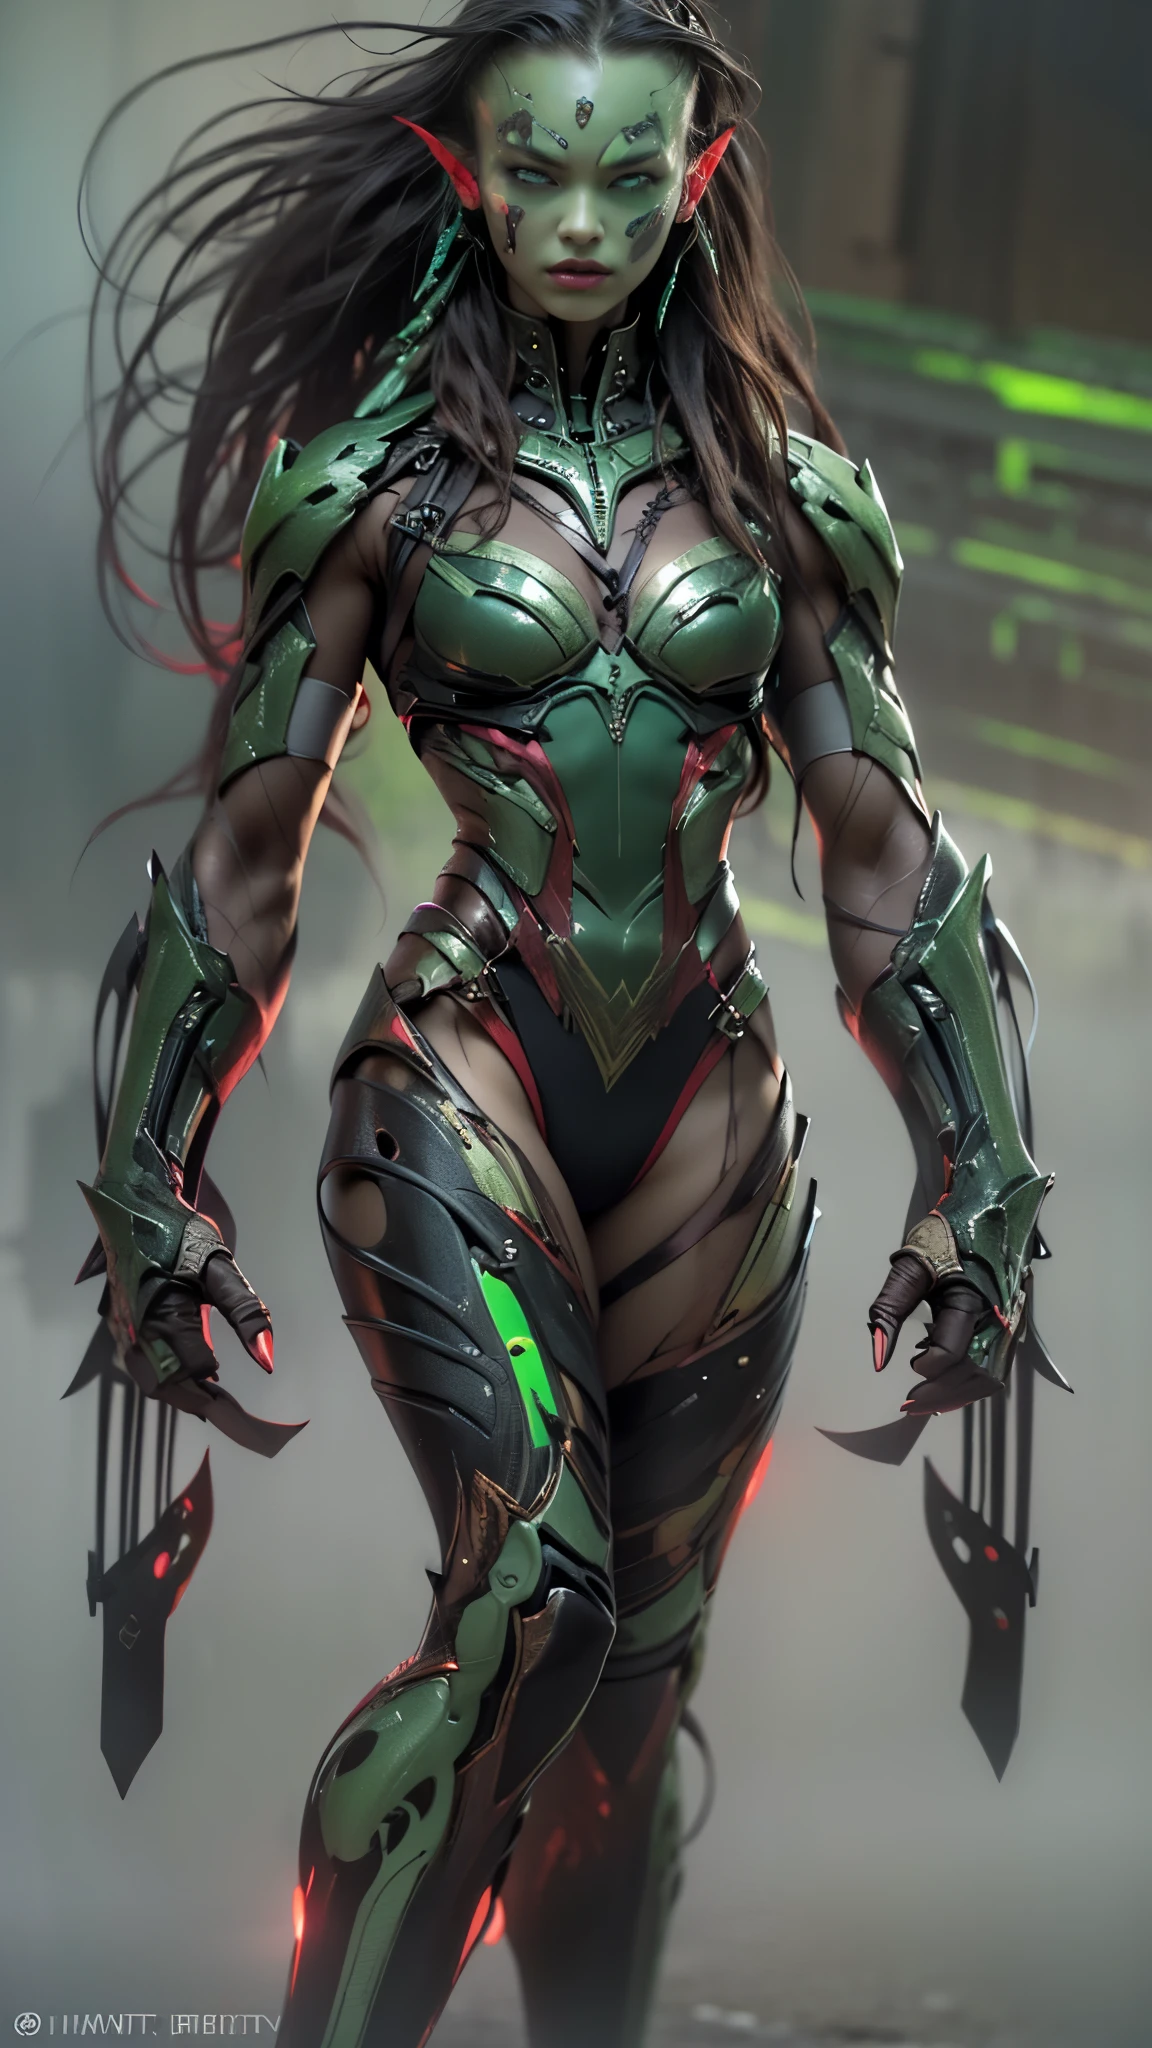 1 female alien, The predator, (incredibly beautiful:1.2), (gaze:1.4), (predator:1.1), long dark claws, (NFV:1), nipples, thick eyebrows, (She has sparkling emerald green eyes:1.2), the most beautiful face in the universe, Red hair, symmetrical beautiful eyes, hyper detailed eyes,

A woman predator with an incredibly beautiful face, her gaze fixed on her prey, primal force, which cannot be denied.

(Beautiful slim body:1.5), (muscular build:1.2), (wandering:1.3), (smooth movements:1.4)

Her beautiful body, muscular and fit, moved with graceful grace, wander along, ready to strike at any moment. The predator within her was always on,                                                                          
                                                                                                                                                               
 Cinematic drawing of characters, ultra high quality model, Cinematic quality, detail, (complex parts:1.2), a high resolution, a high resolution, conscientiously drawing, official art, Unity 8K Стена , 8K portrait, Best quality, Very a high resolution, ultra detailed artistic photography,